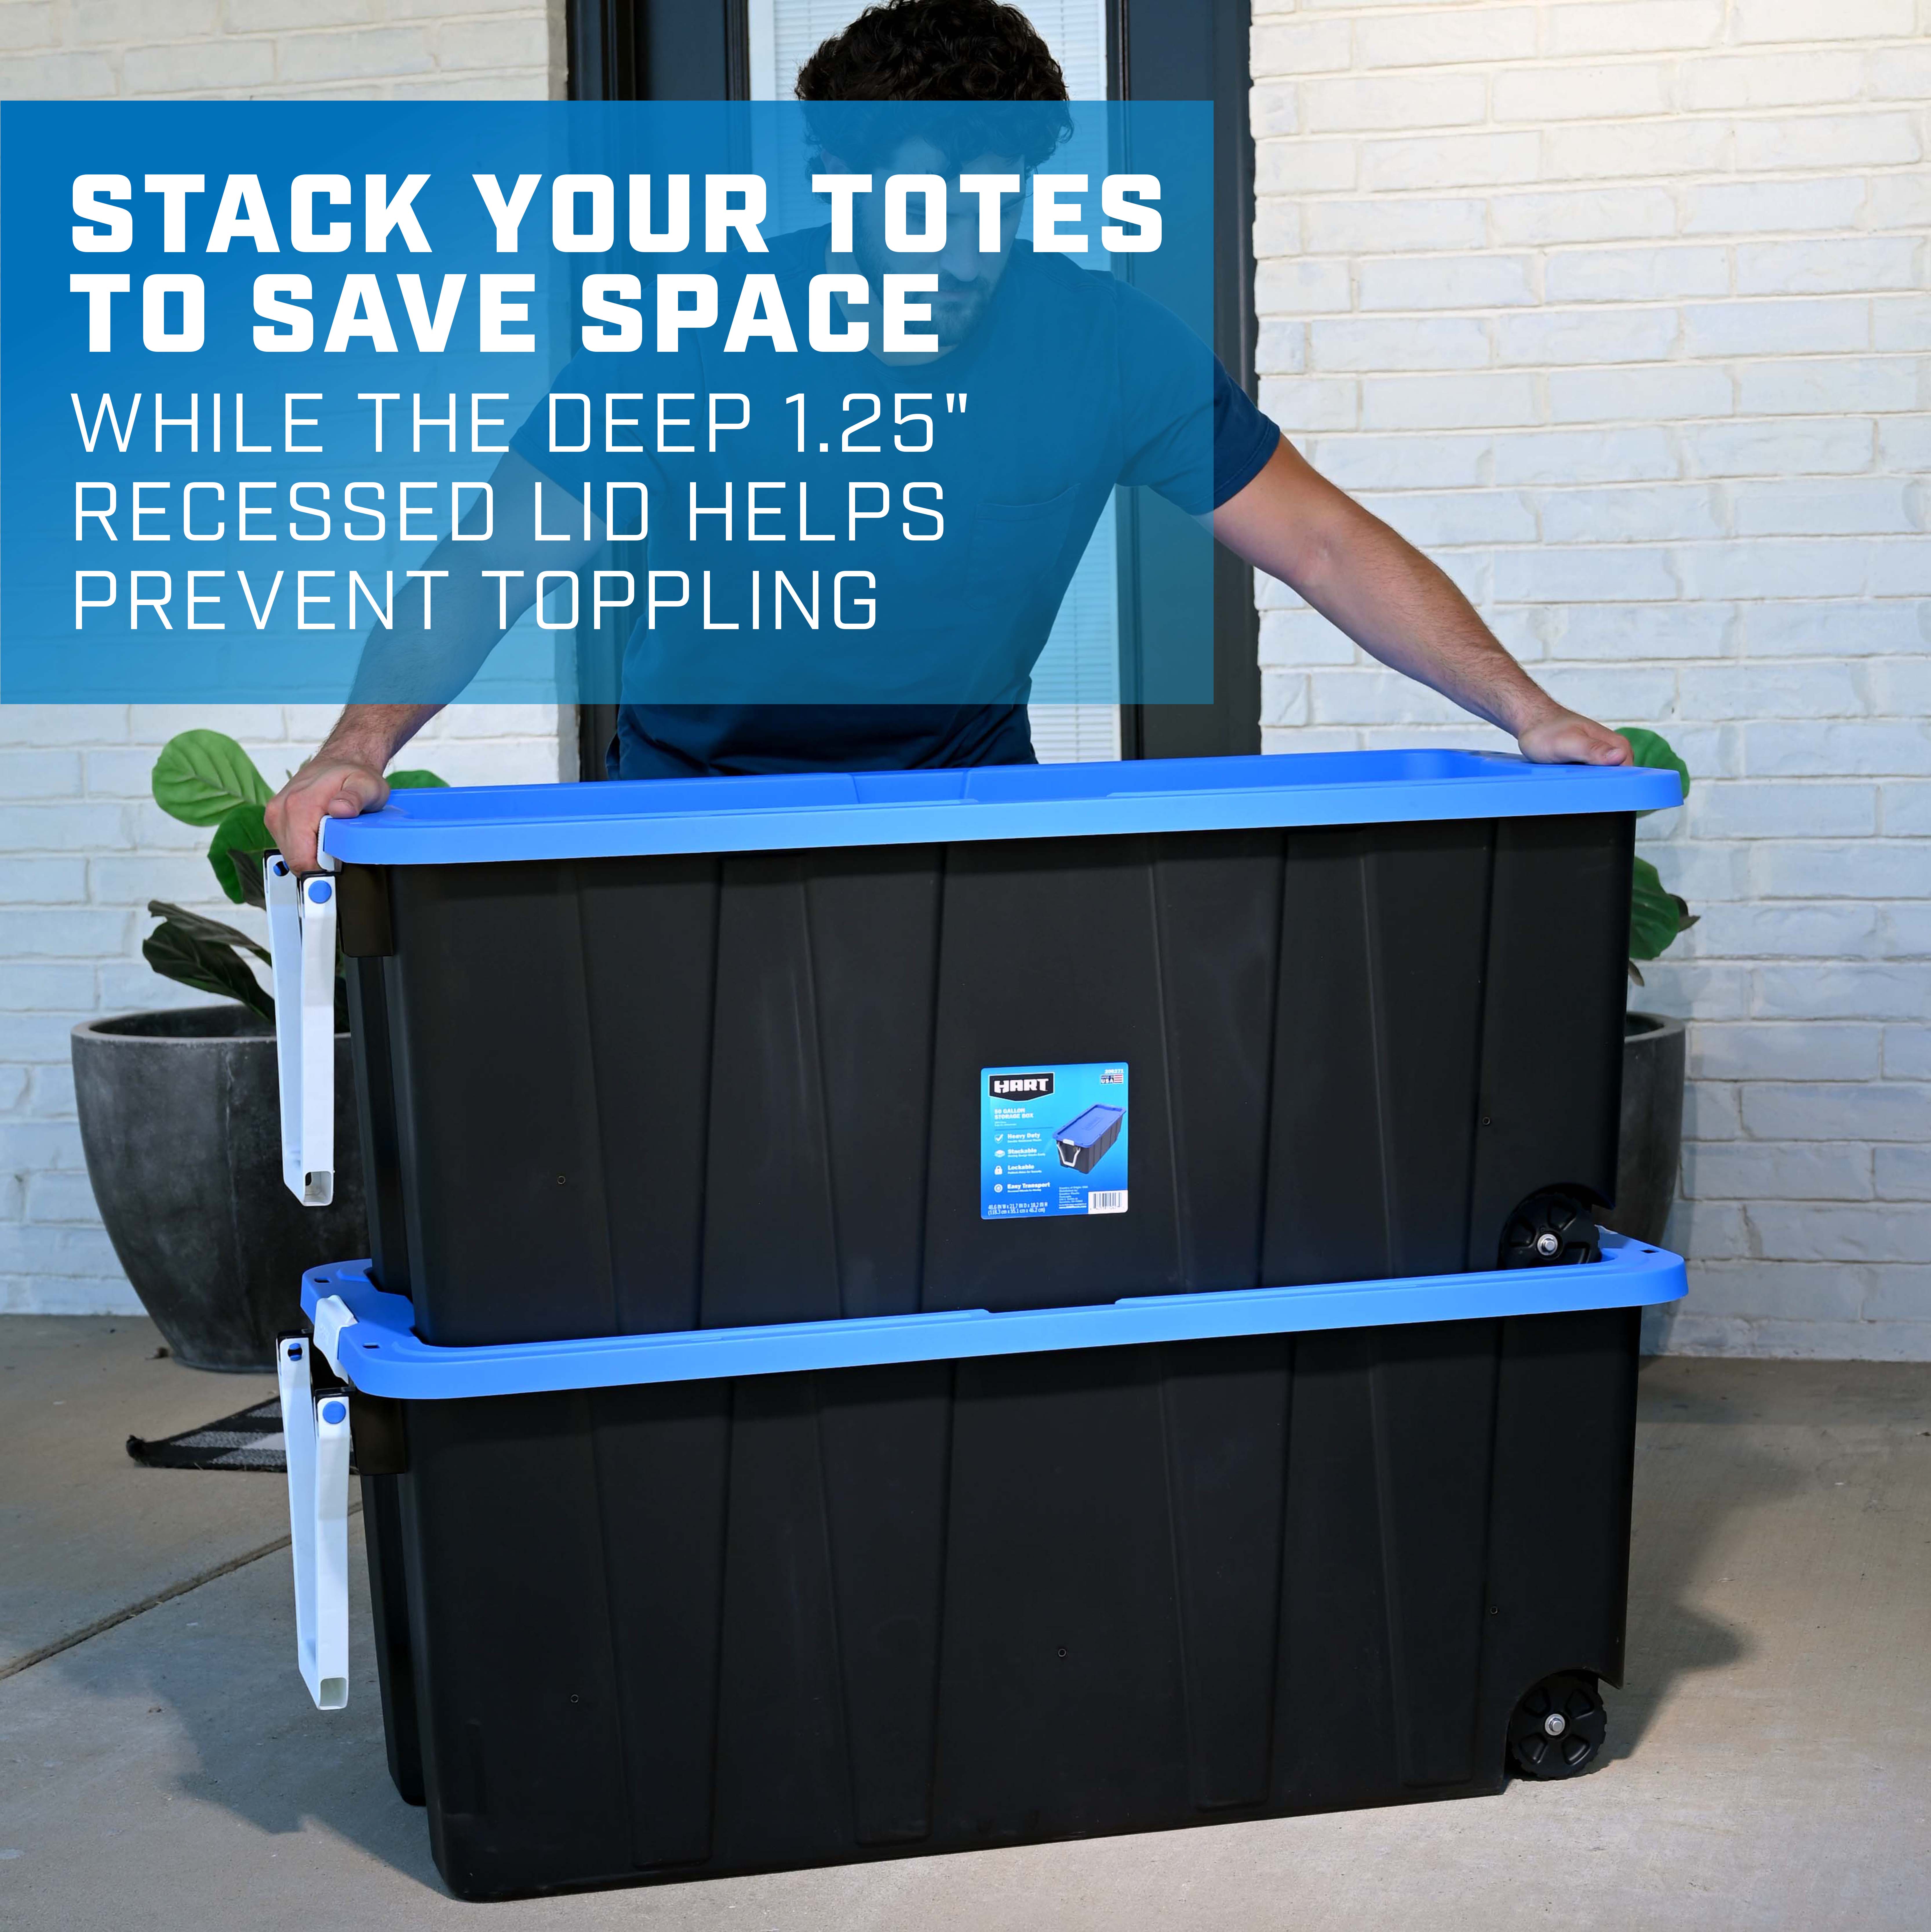 stack your totes to save space while the deep 1.25" recessed lid helps prevent toppling